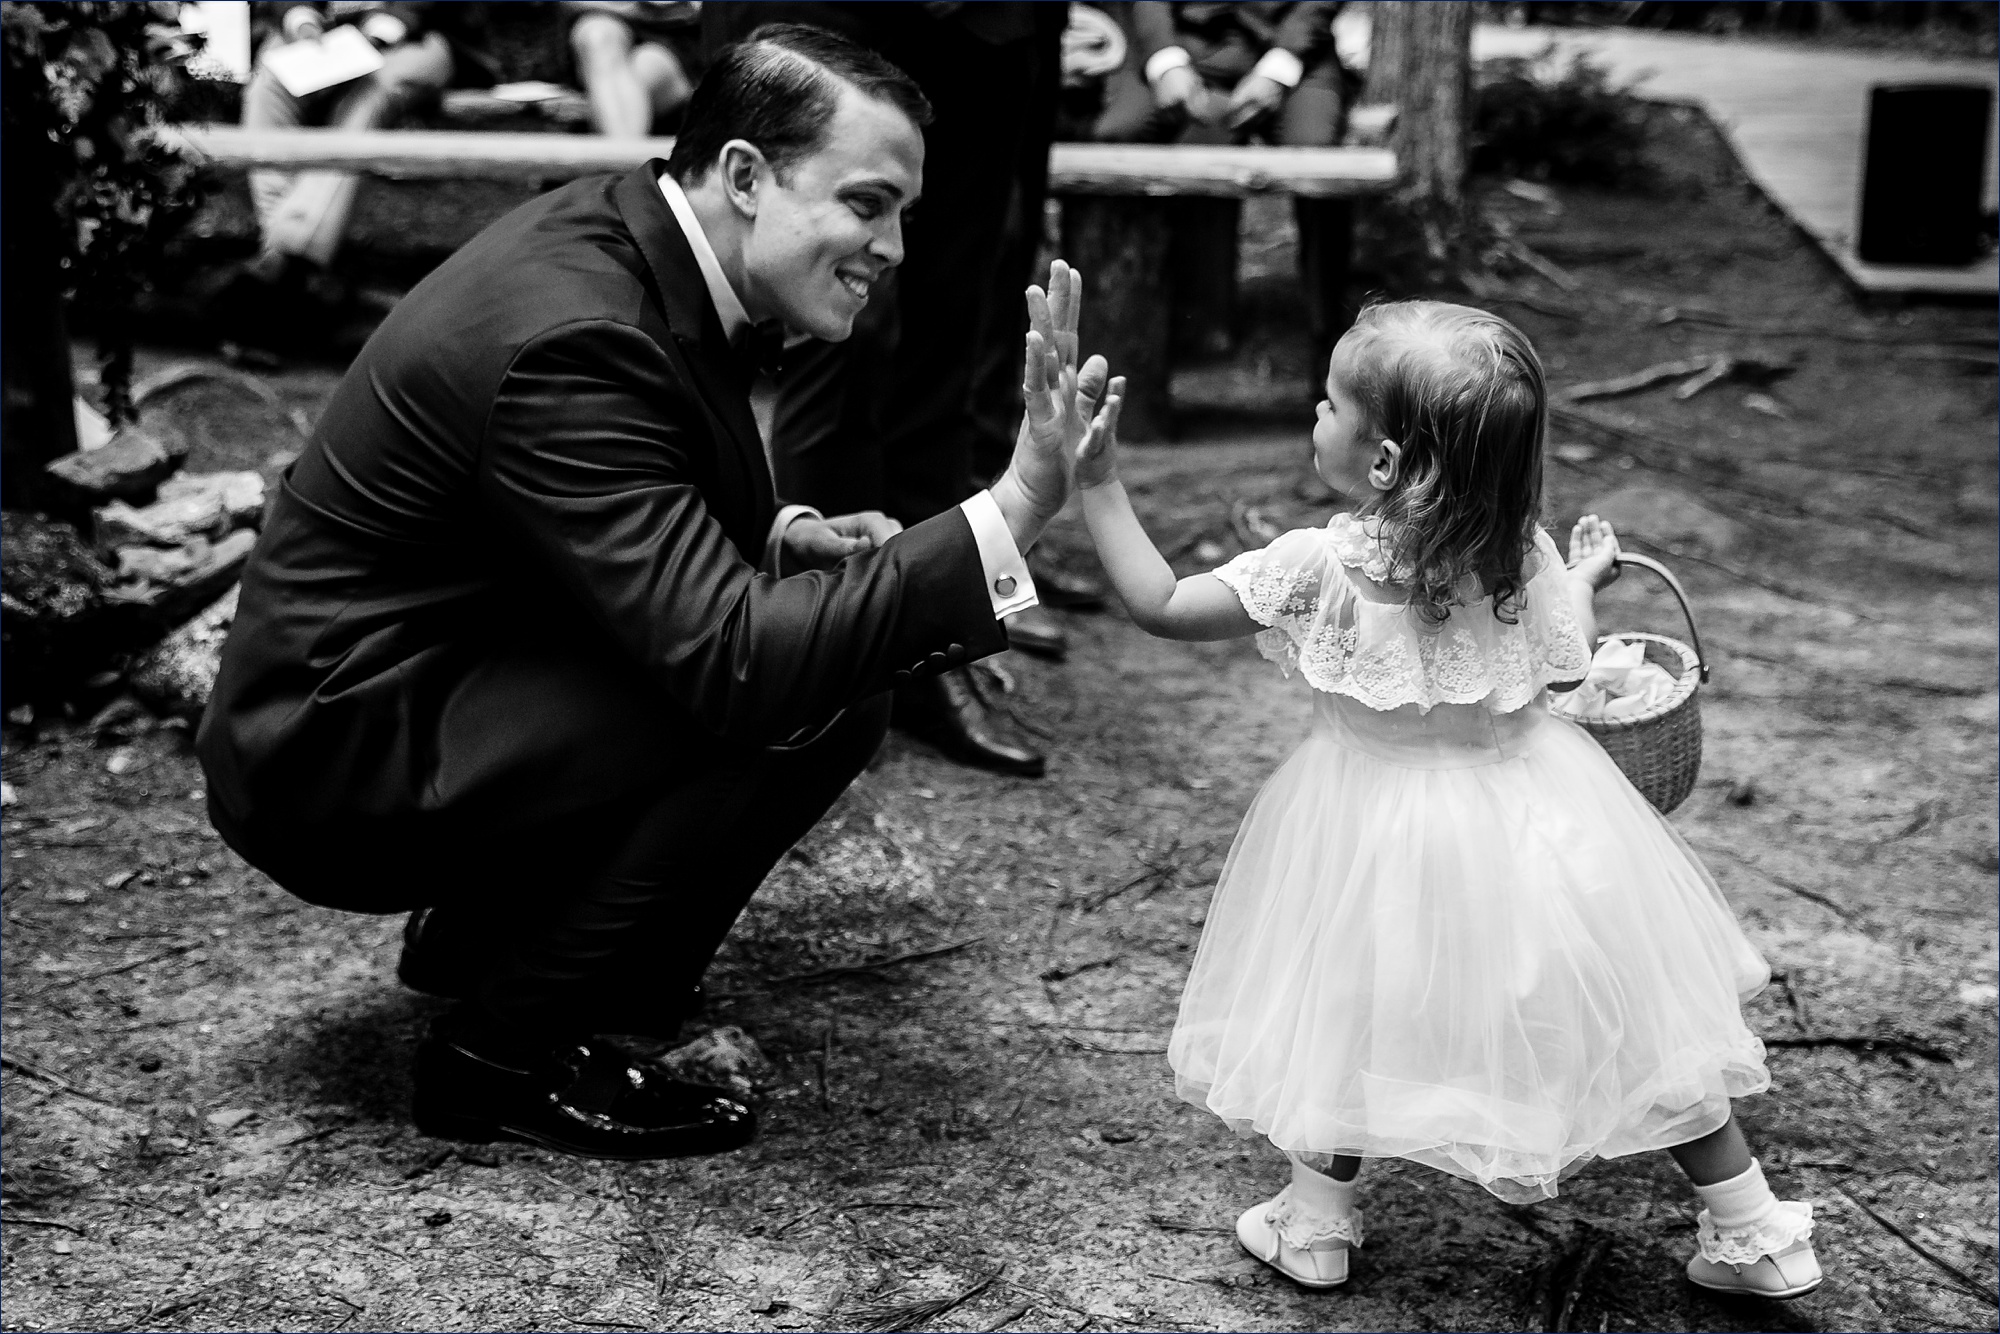 The flower girl and the groom high five at the wedding ceremony in the woods of Maine